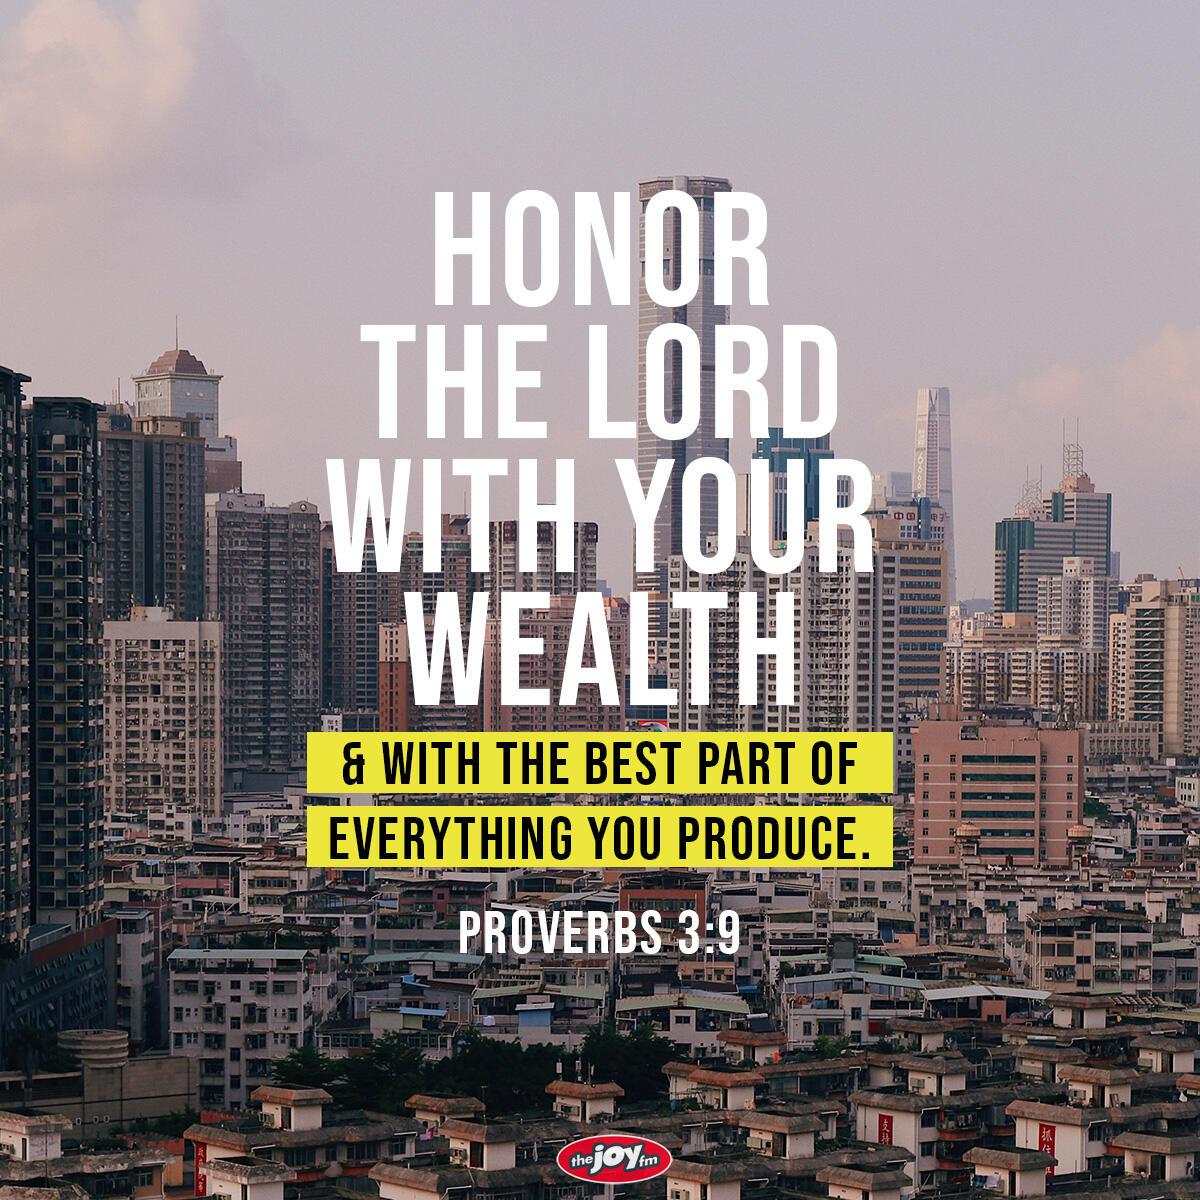 Proverbs 3:9 - Verse of the Day